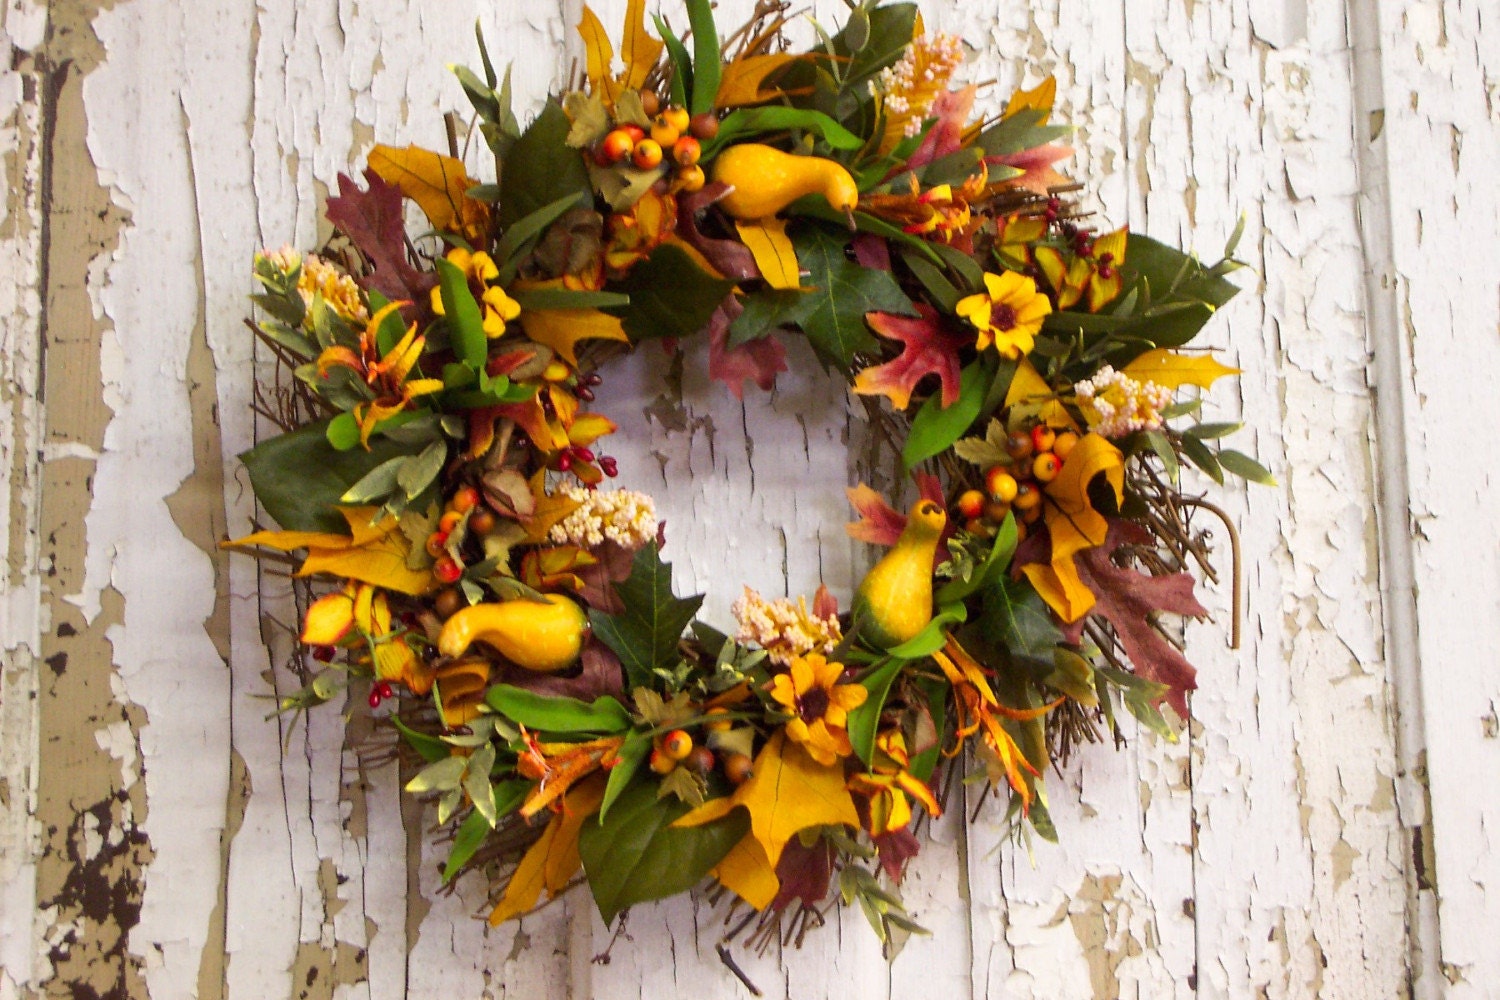 Signs of Autumn Fall Wreath